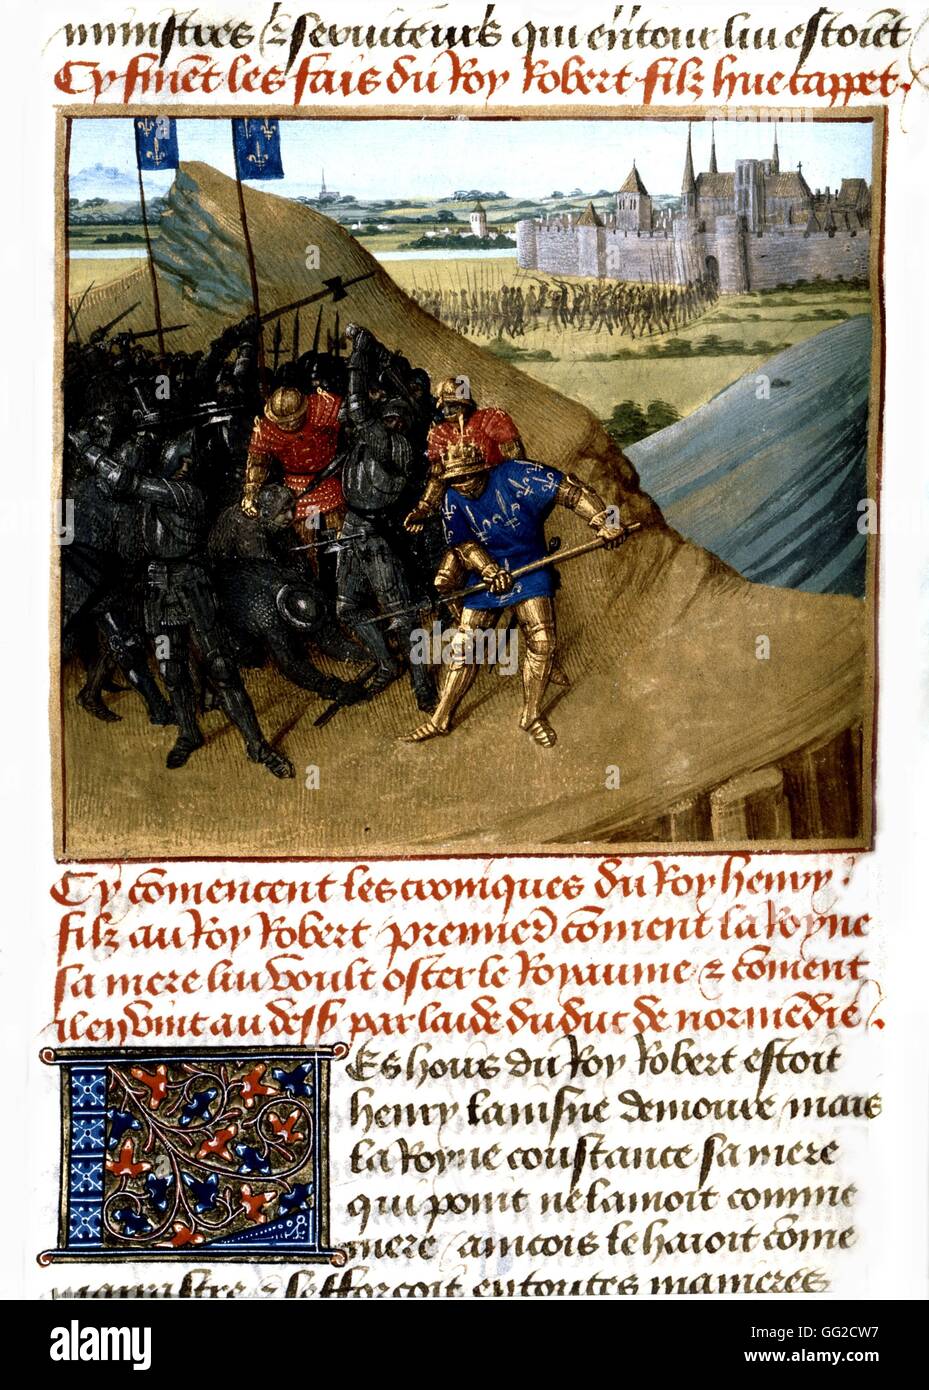 Chronicles of St. Denis. Miniature by Jean Fouquet. Battle of king Henri I of France (1031-1060) against the Count of Champagne, son of Eudes de Blois, prince of Tours 15th century France Stock Photo